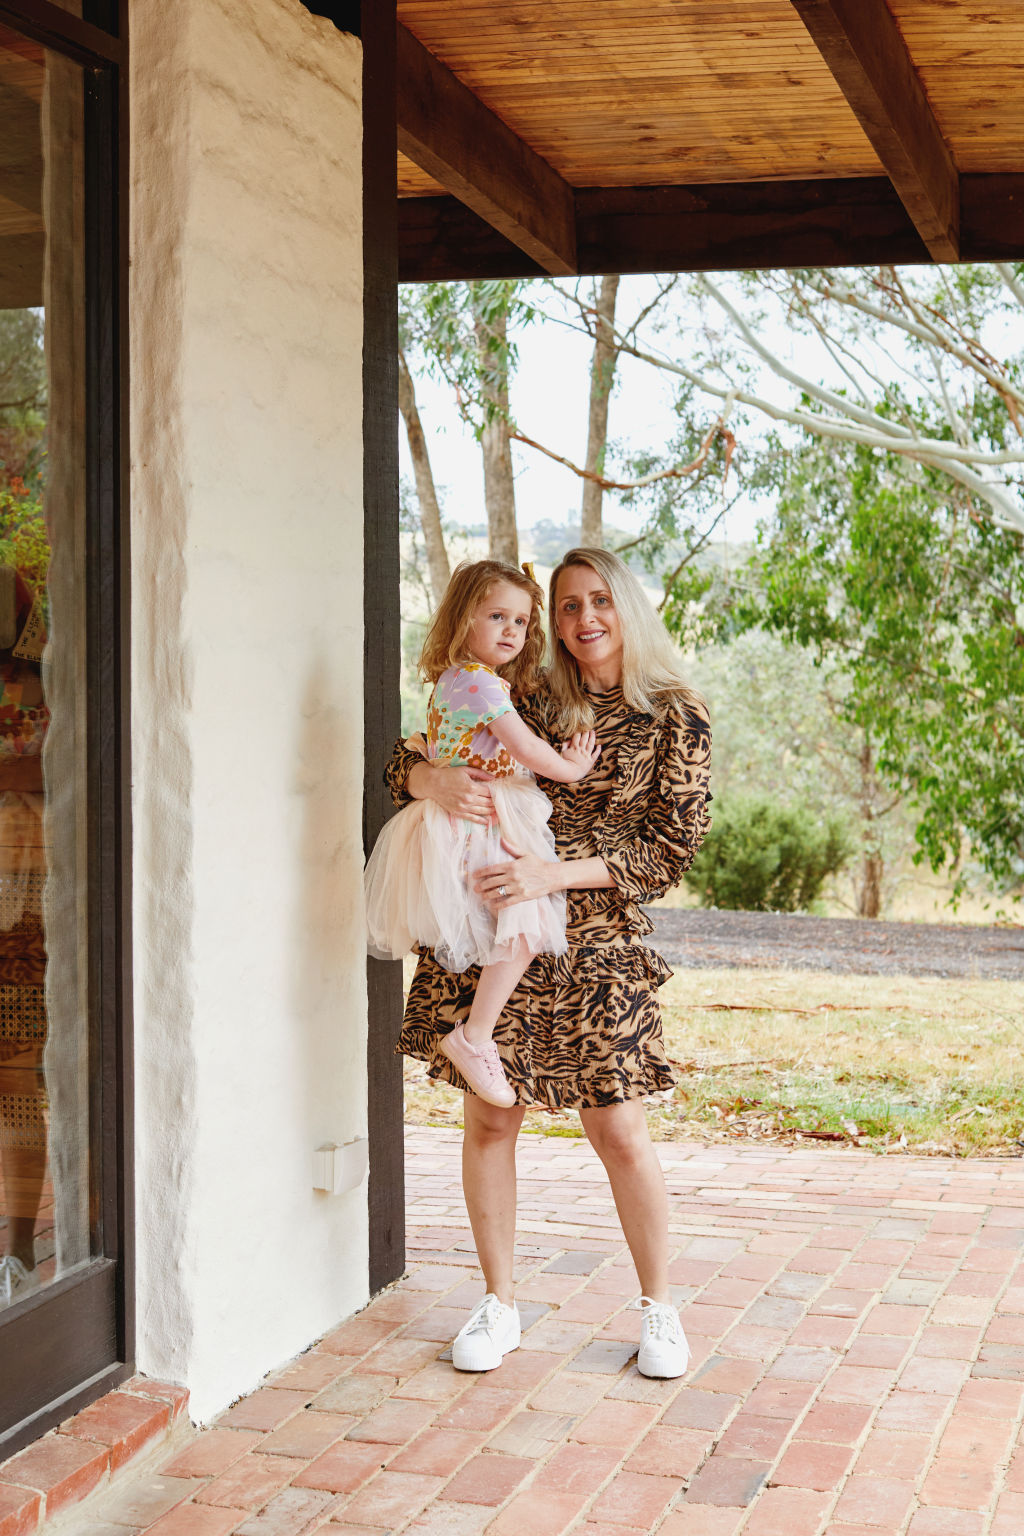 Susie Silverii with daughter Lulu on their 20-acre property built by Alistair Knox. Photo: Amelia Stanwix